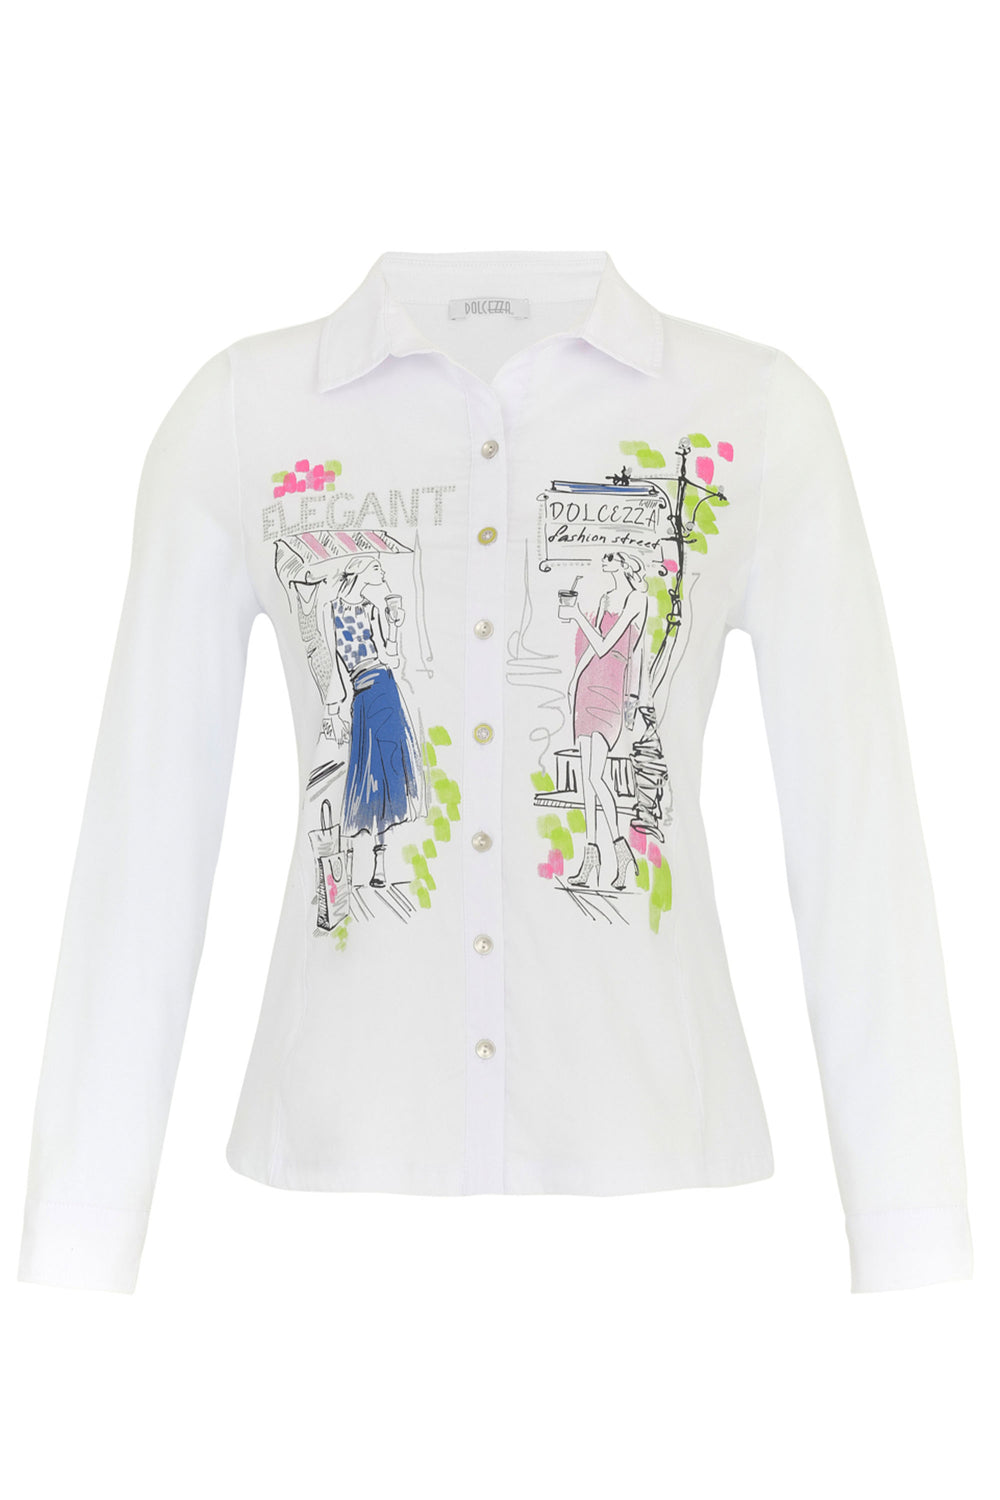 Dolcezza Spring 2024 It is made with breathable and stretchy cotton fabric for superior comfort. Featuring the lovely new abstract spring themed print, long sleeves, a classic collar and front buttons, this top combines style and function.